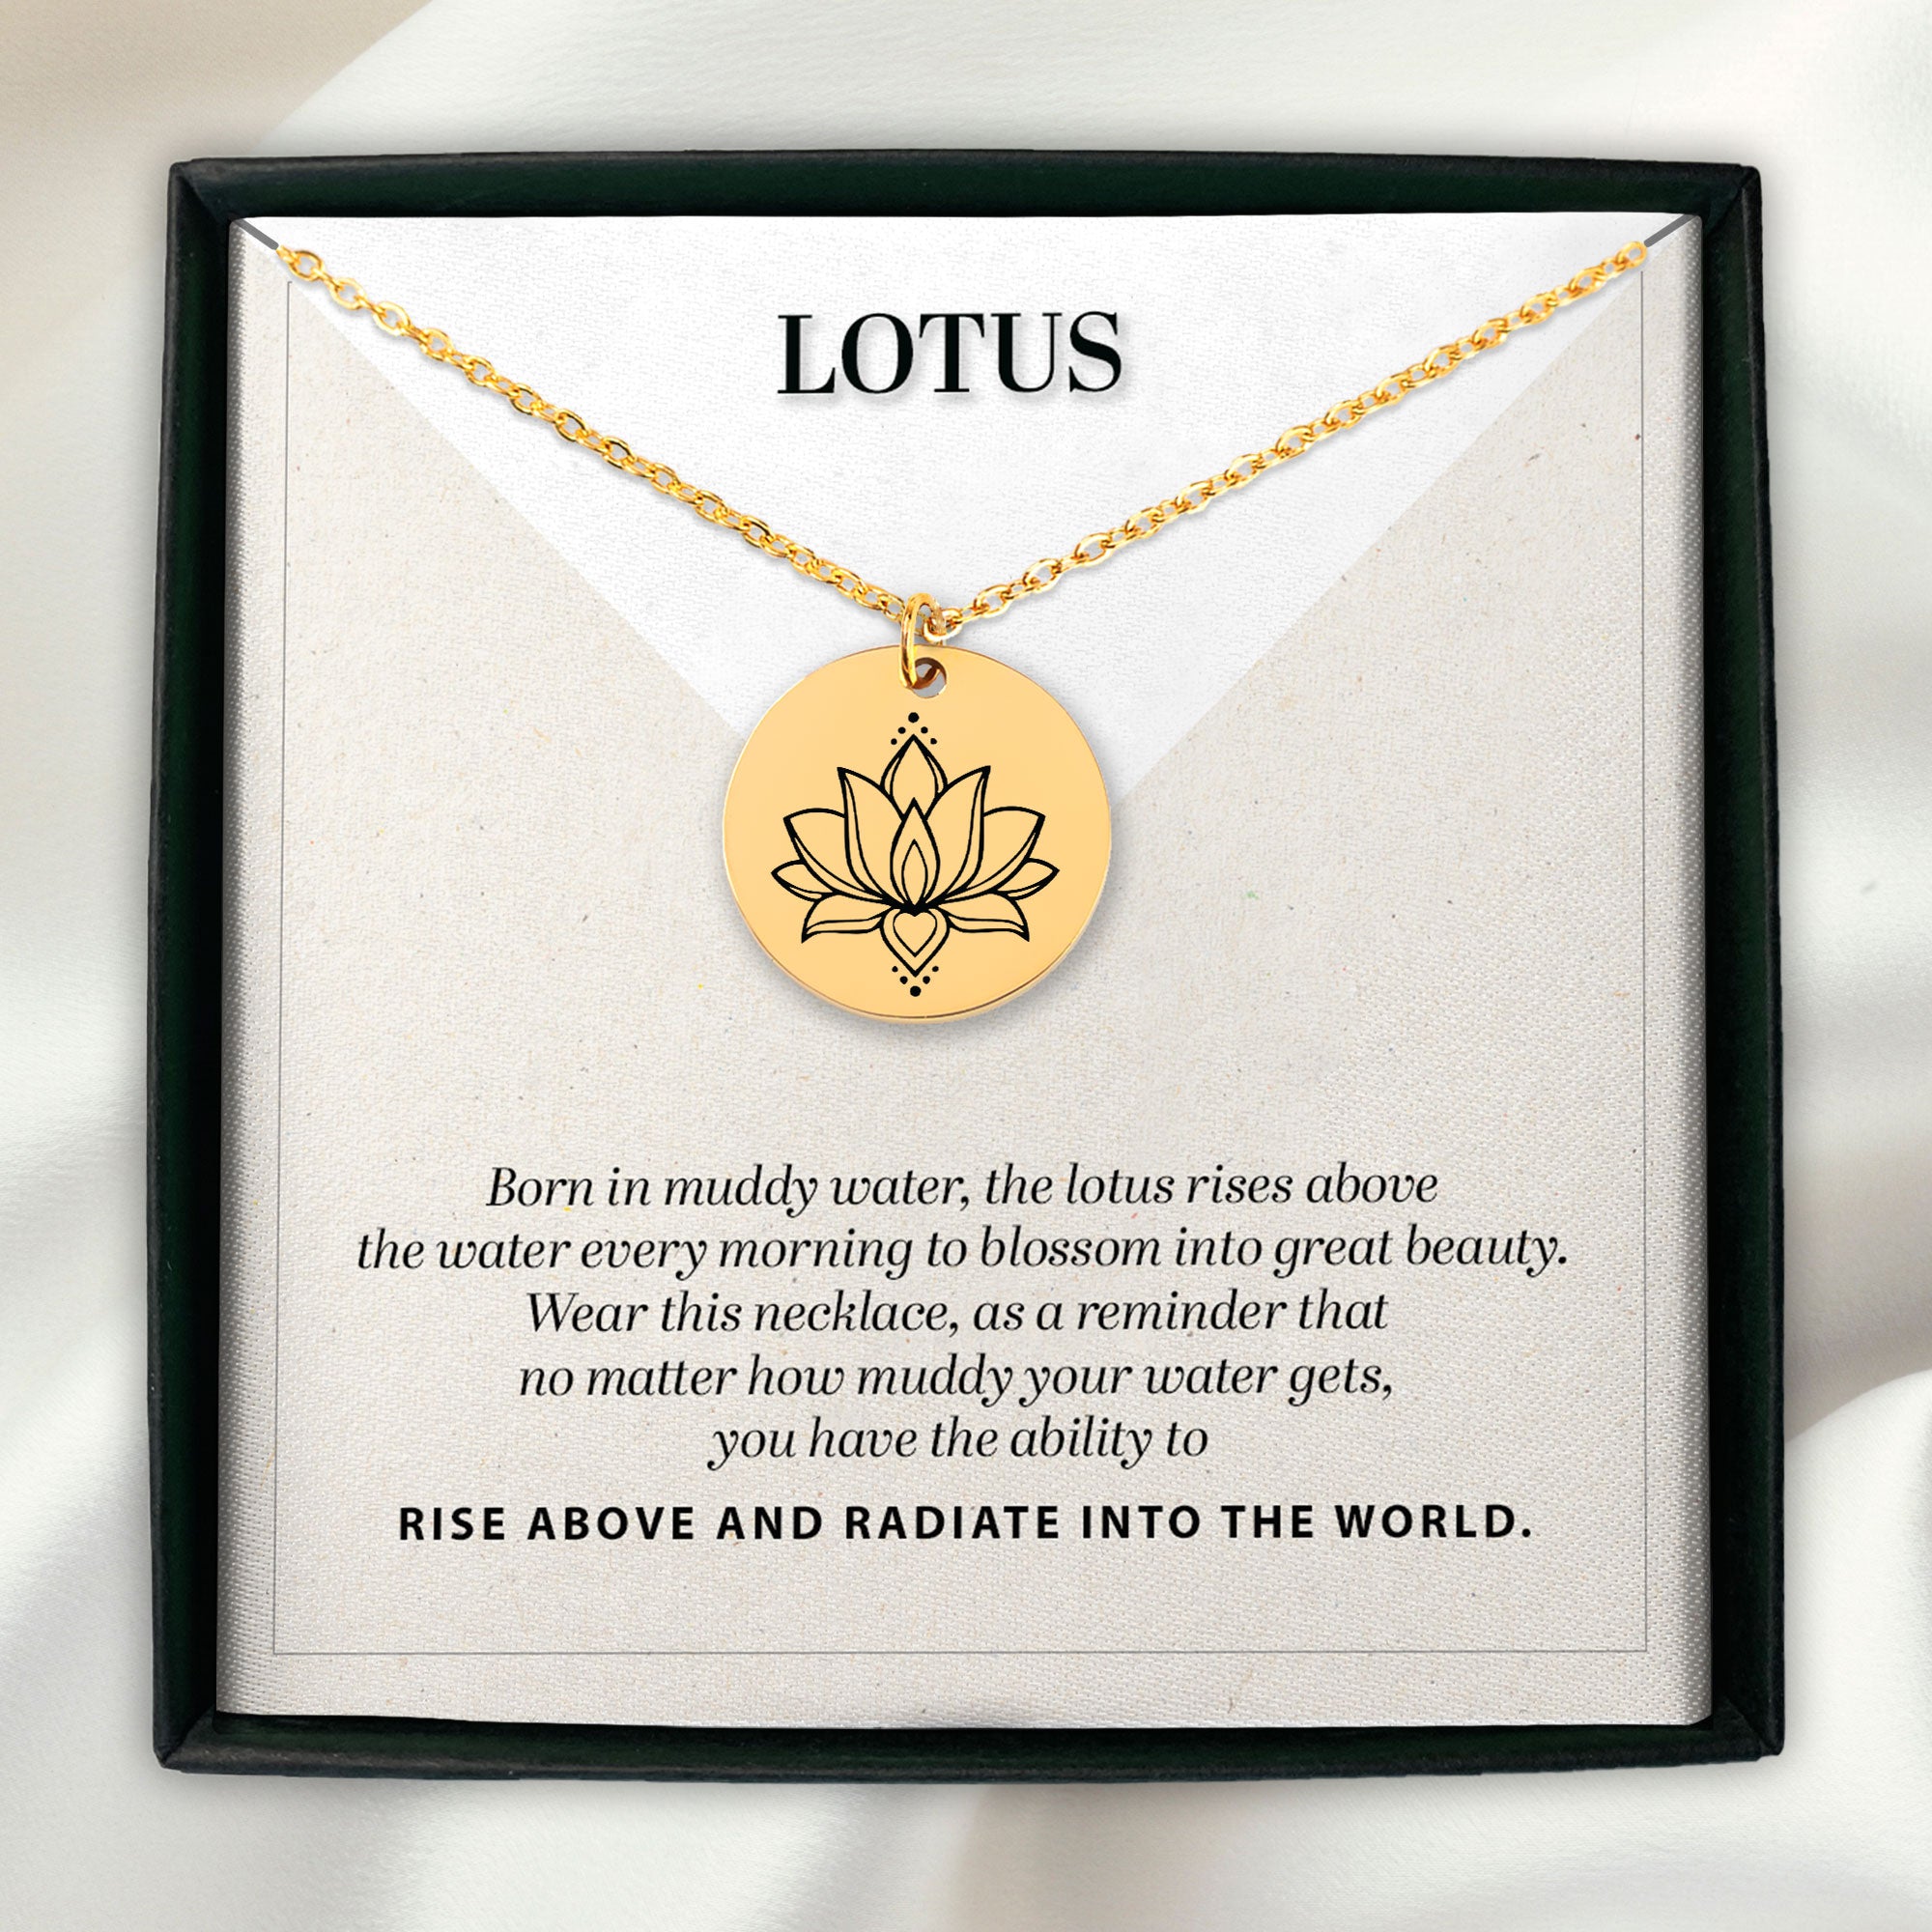 Personalized Lotus Necklace, Encouragement Motivational Gift, Personalized Gift For Her, Sacred Lotus Pendant, Lotus Necklace with Gift Box